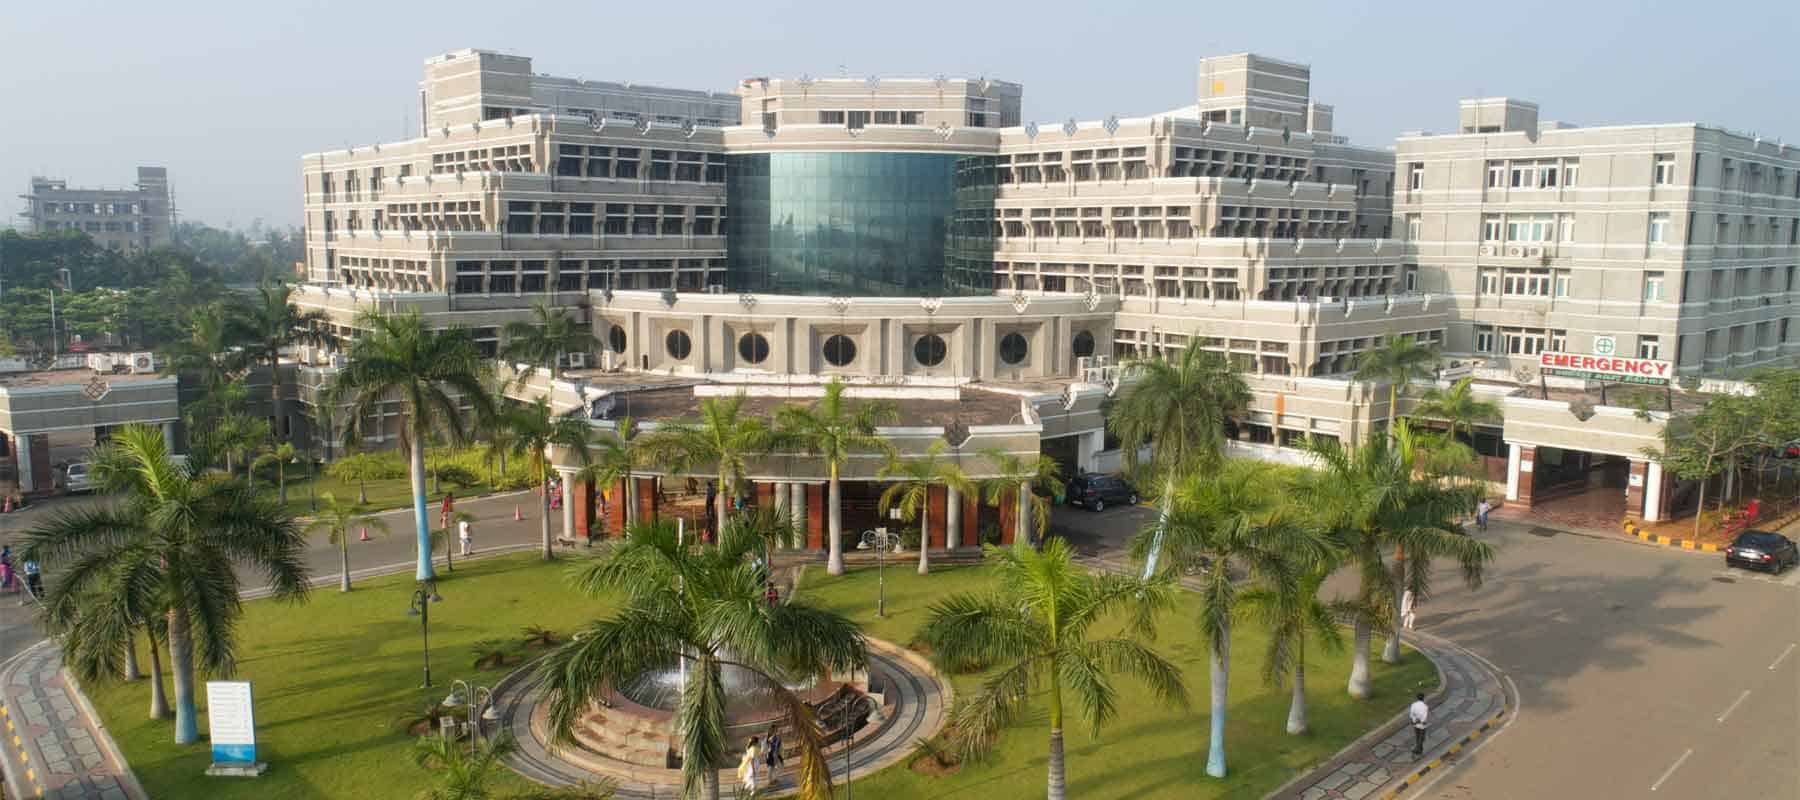 Mahatma Gandhi Medical College Pondicherry 2022-23: Admission, courses offered, Fee structure, Eligibility Criteria, cutoff, Ranking, Contact Details